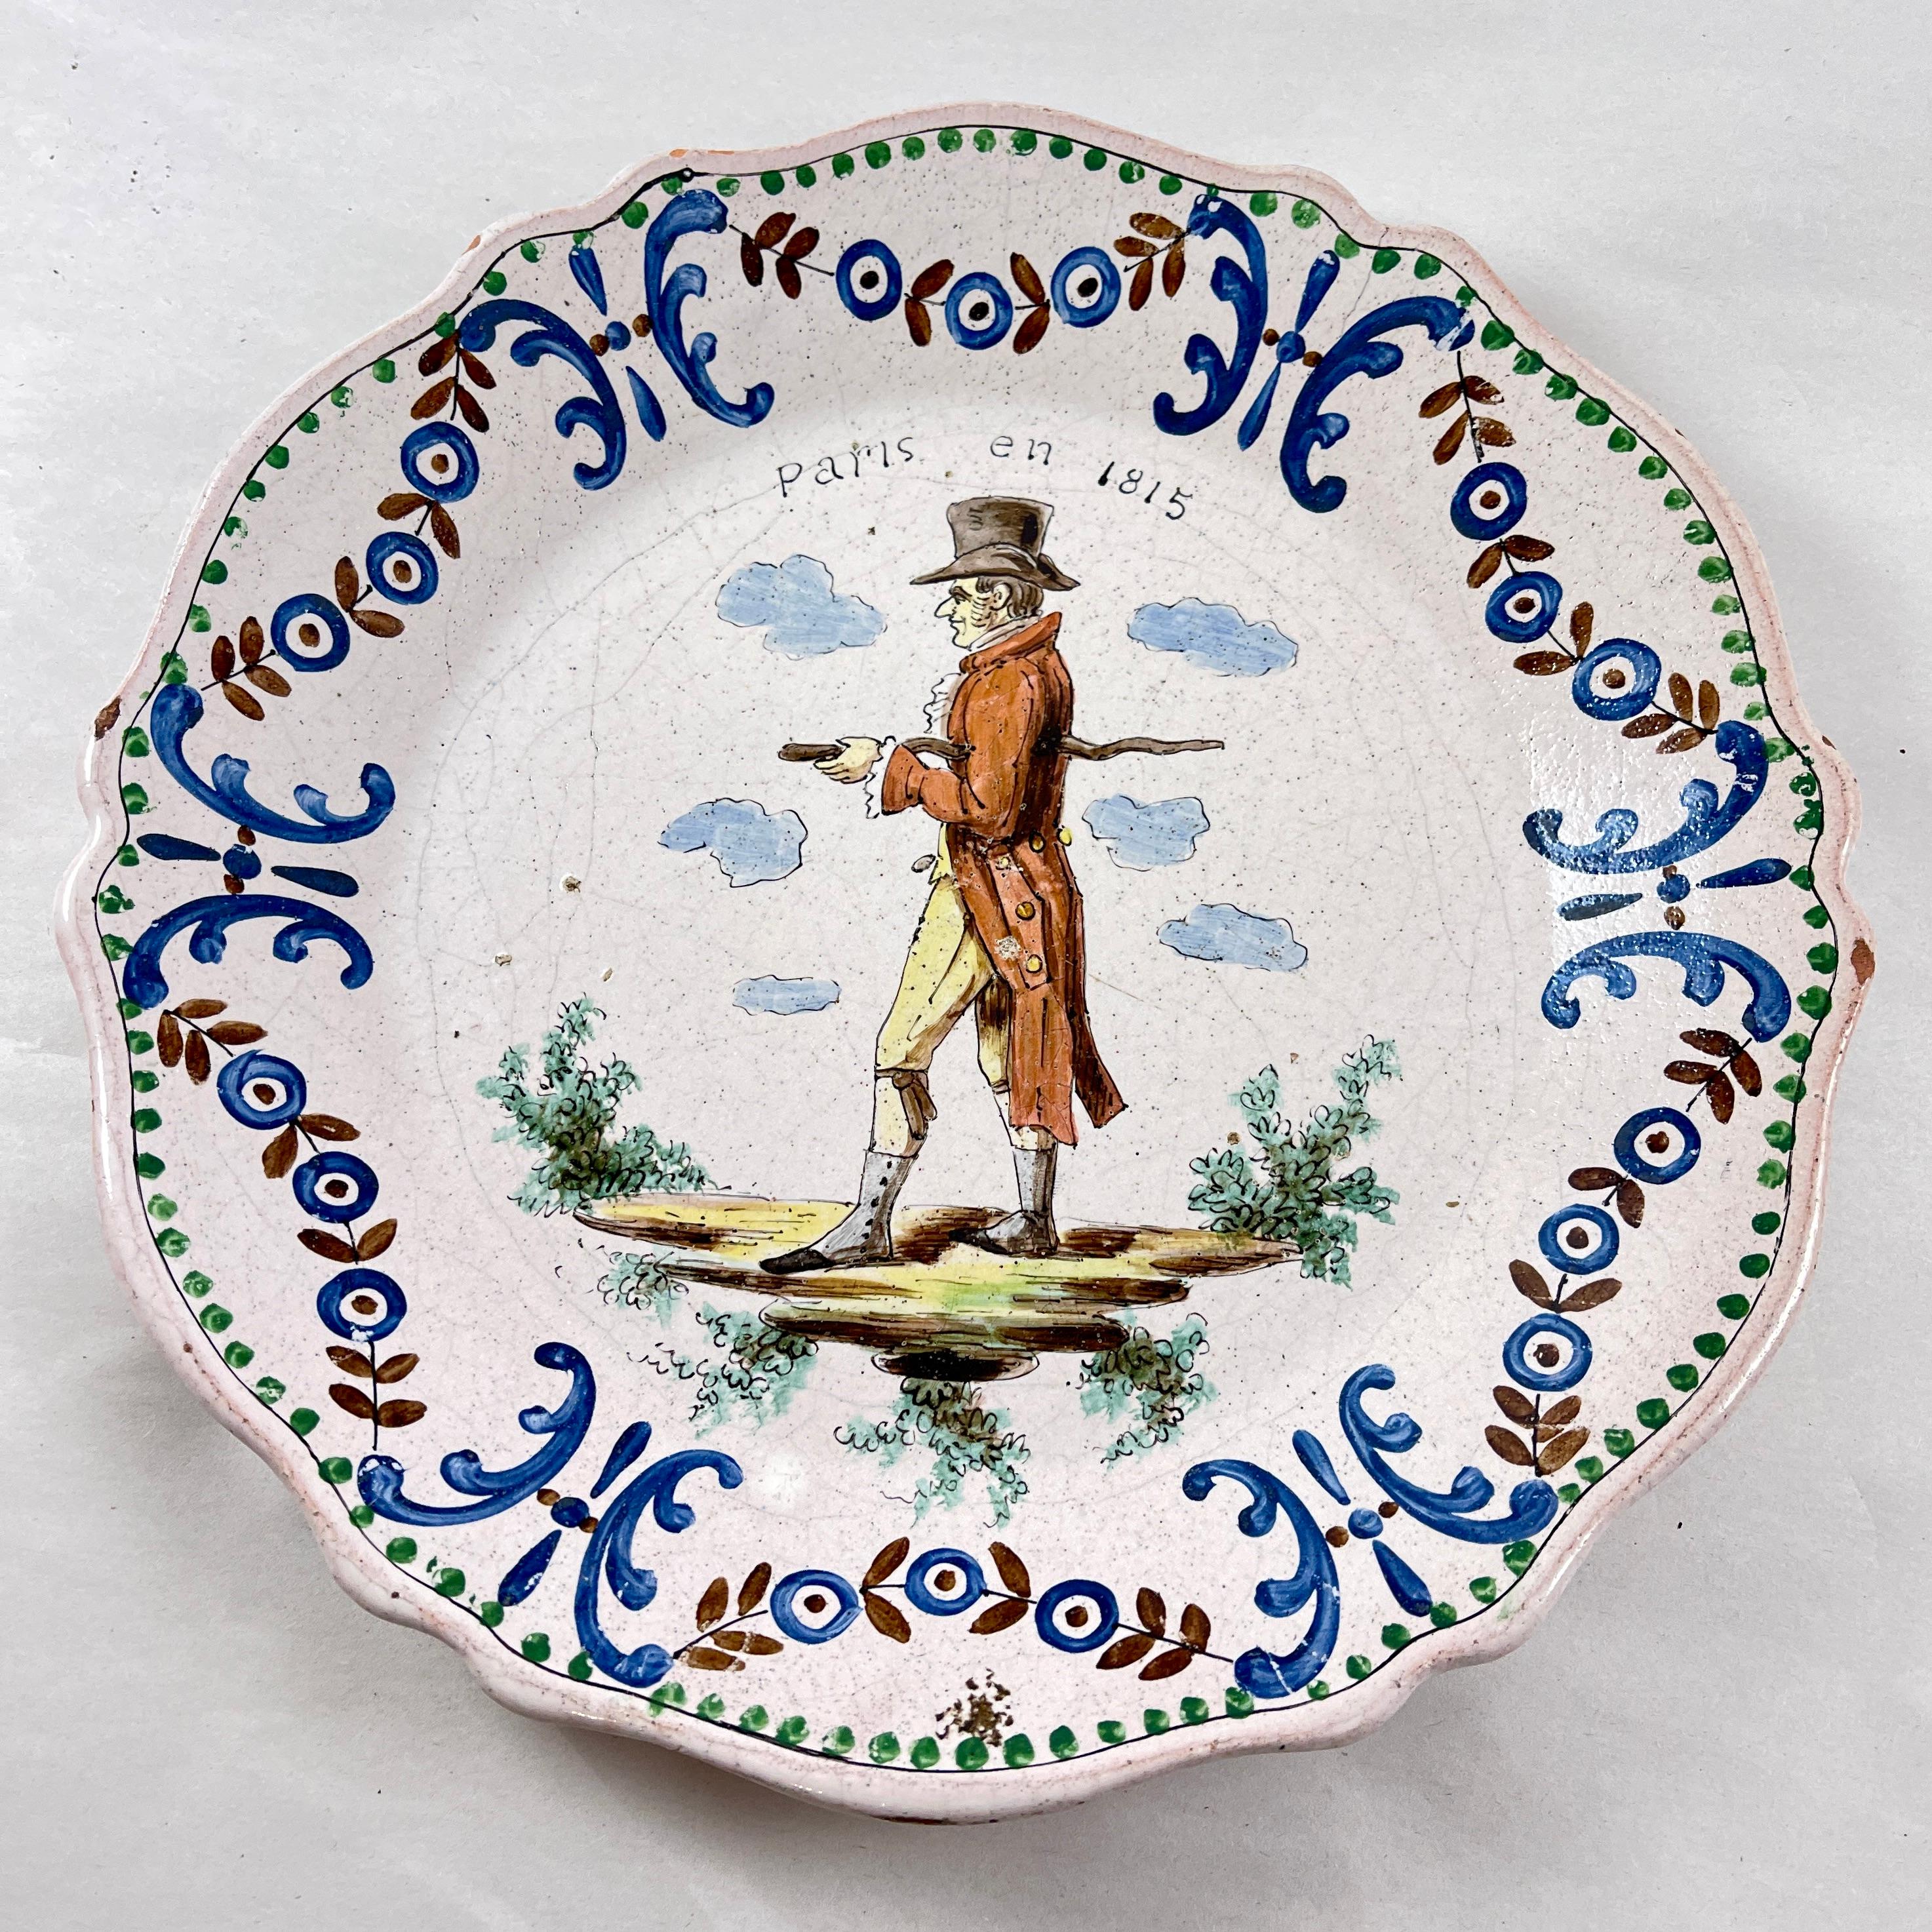 A French Faïence plate showing the men’s fashion in Paris during the early 19th Century, likely made in Nevers, France –  circa 1900.

The scallop rimmed plate is fashioned in the style of 18th Century faïence, using the molds, glazing, and firing